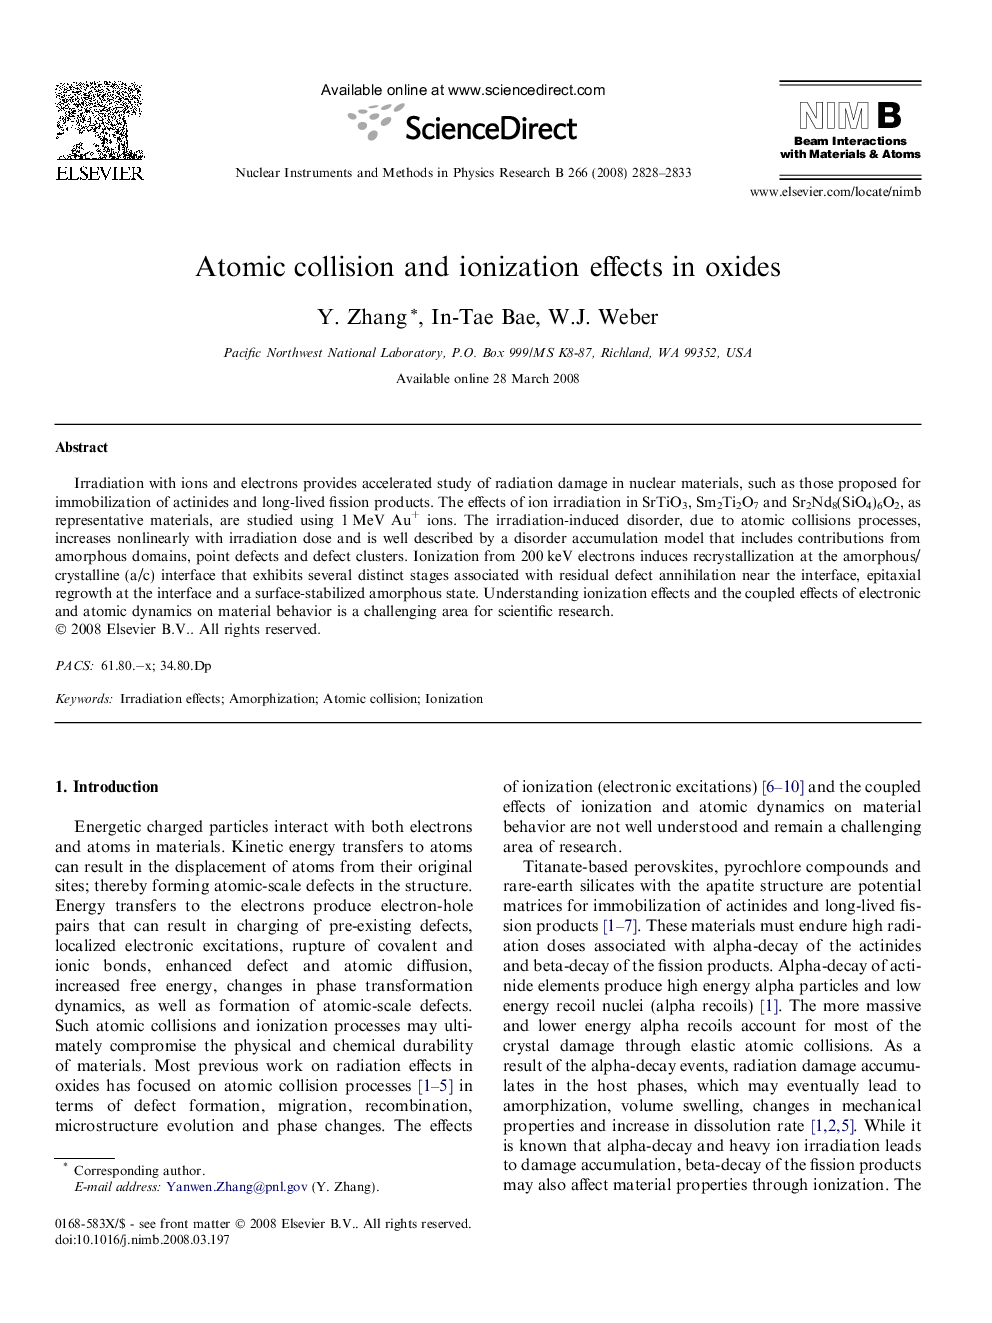 Atomic collision and ionization effects in oxides